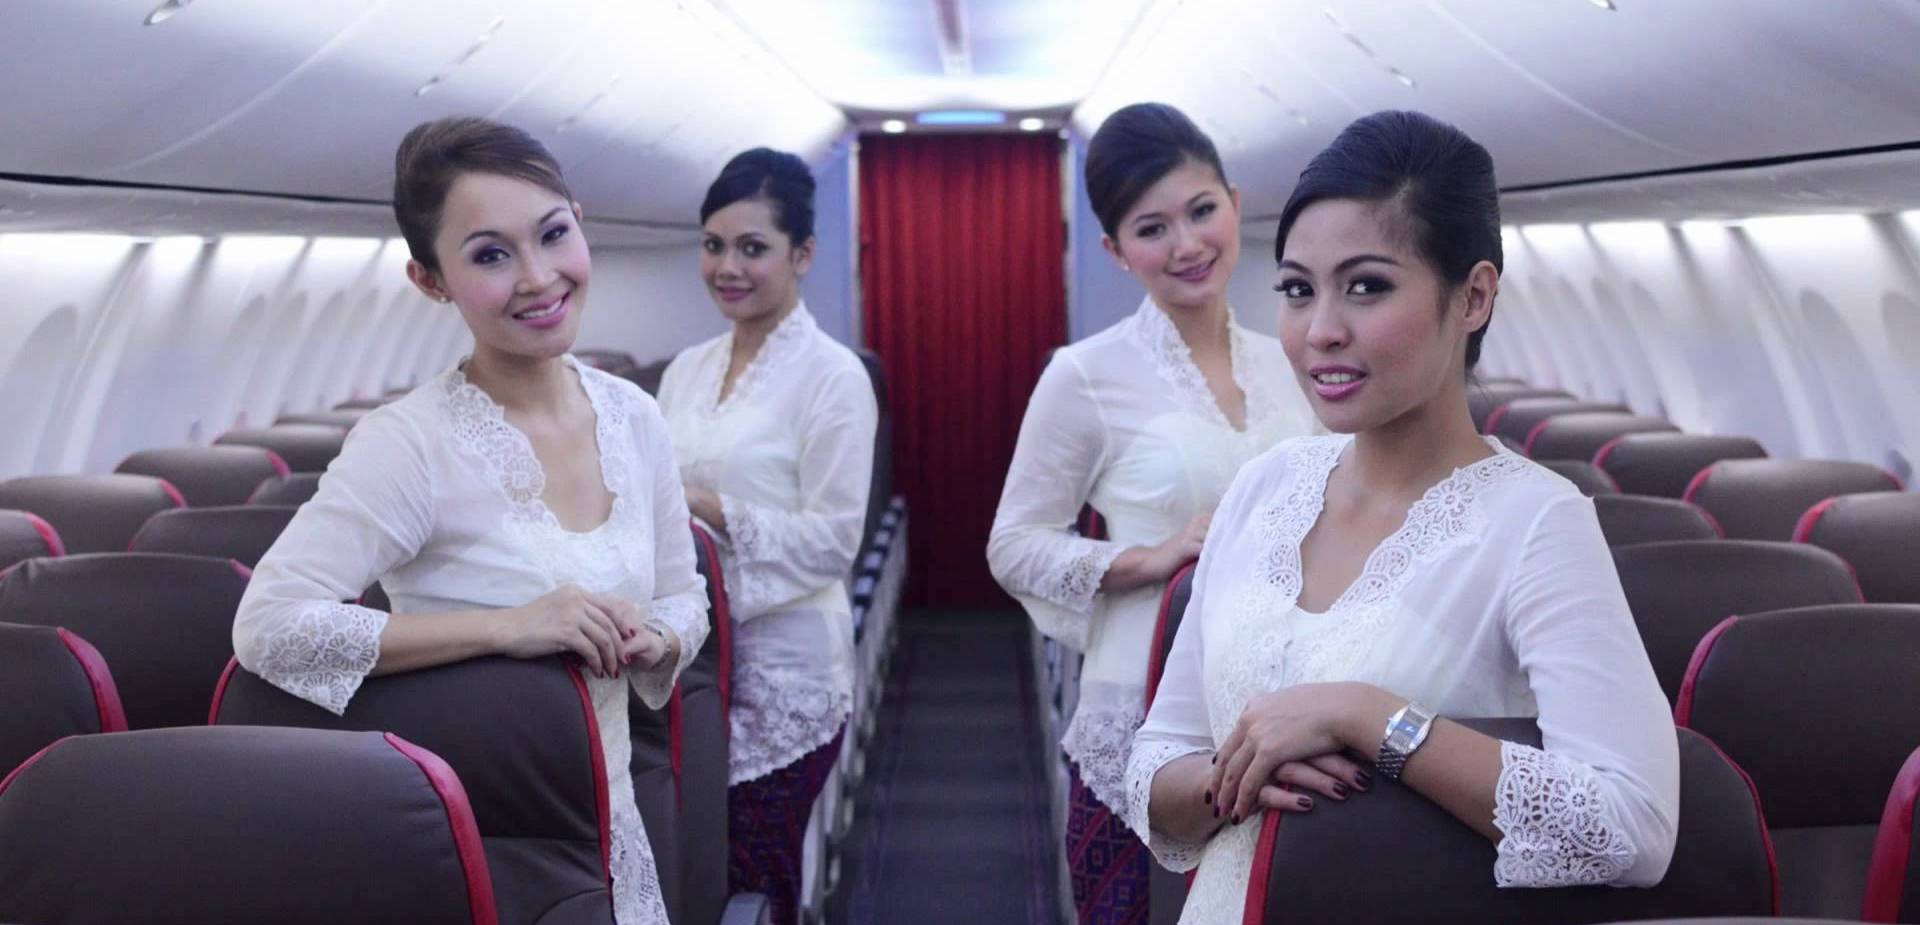 a group of women in white shirts on a plane